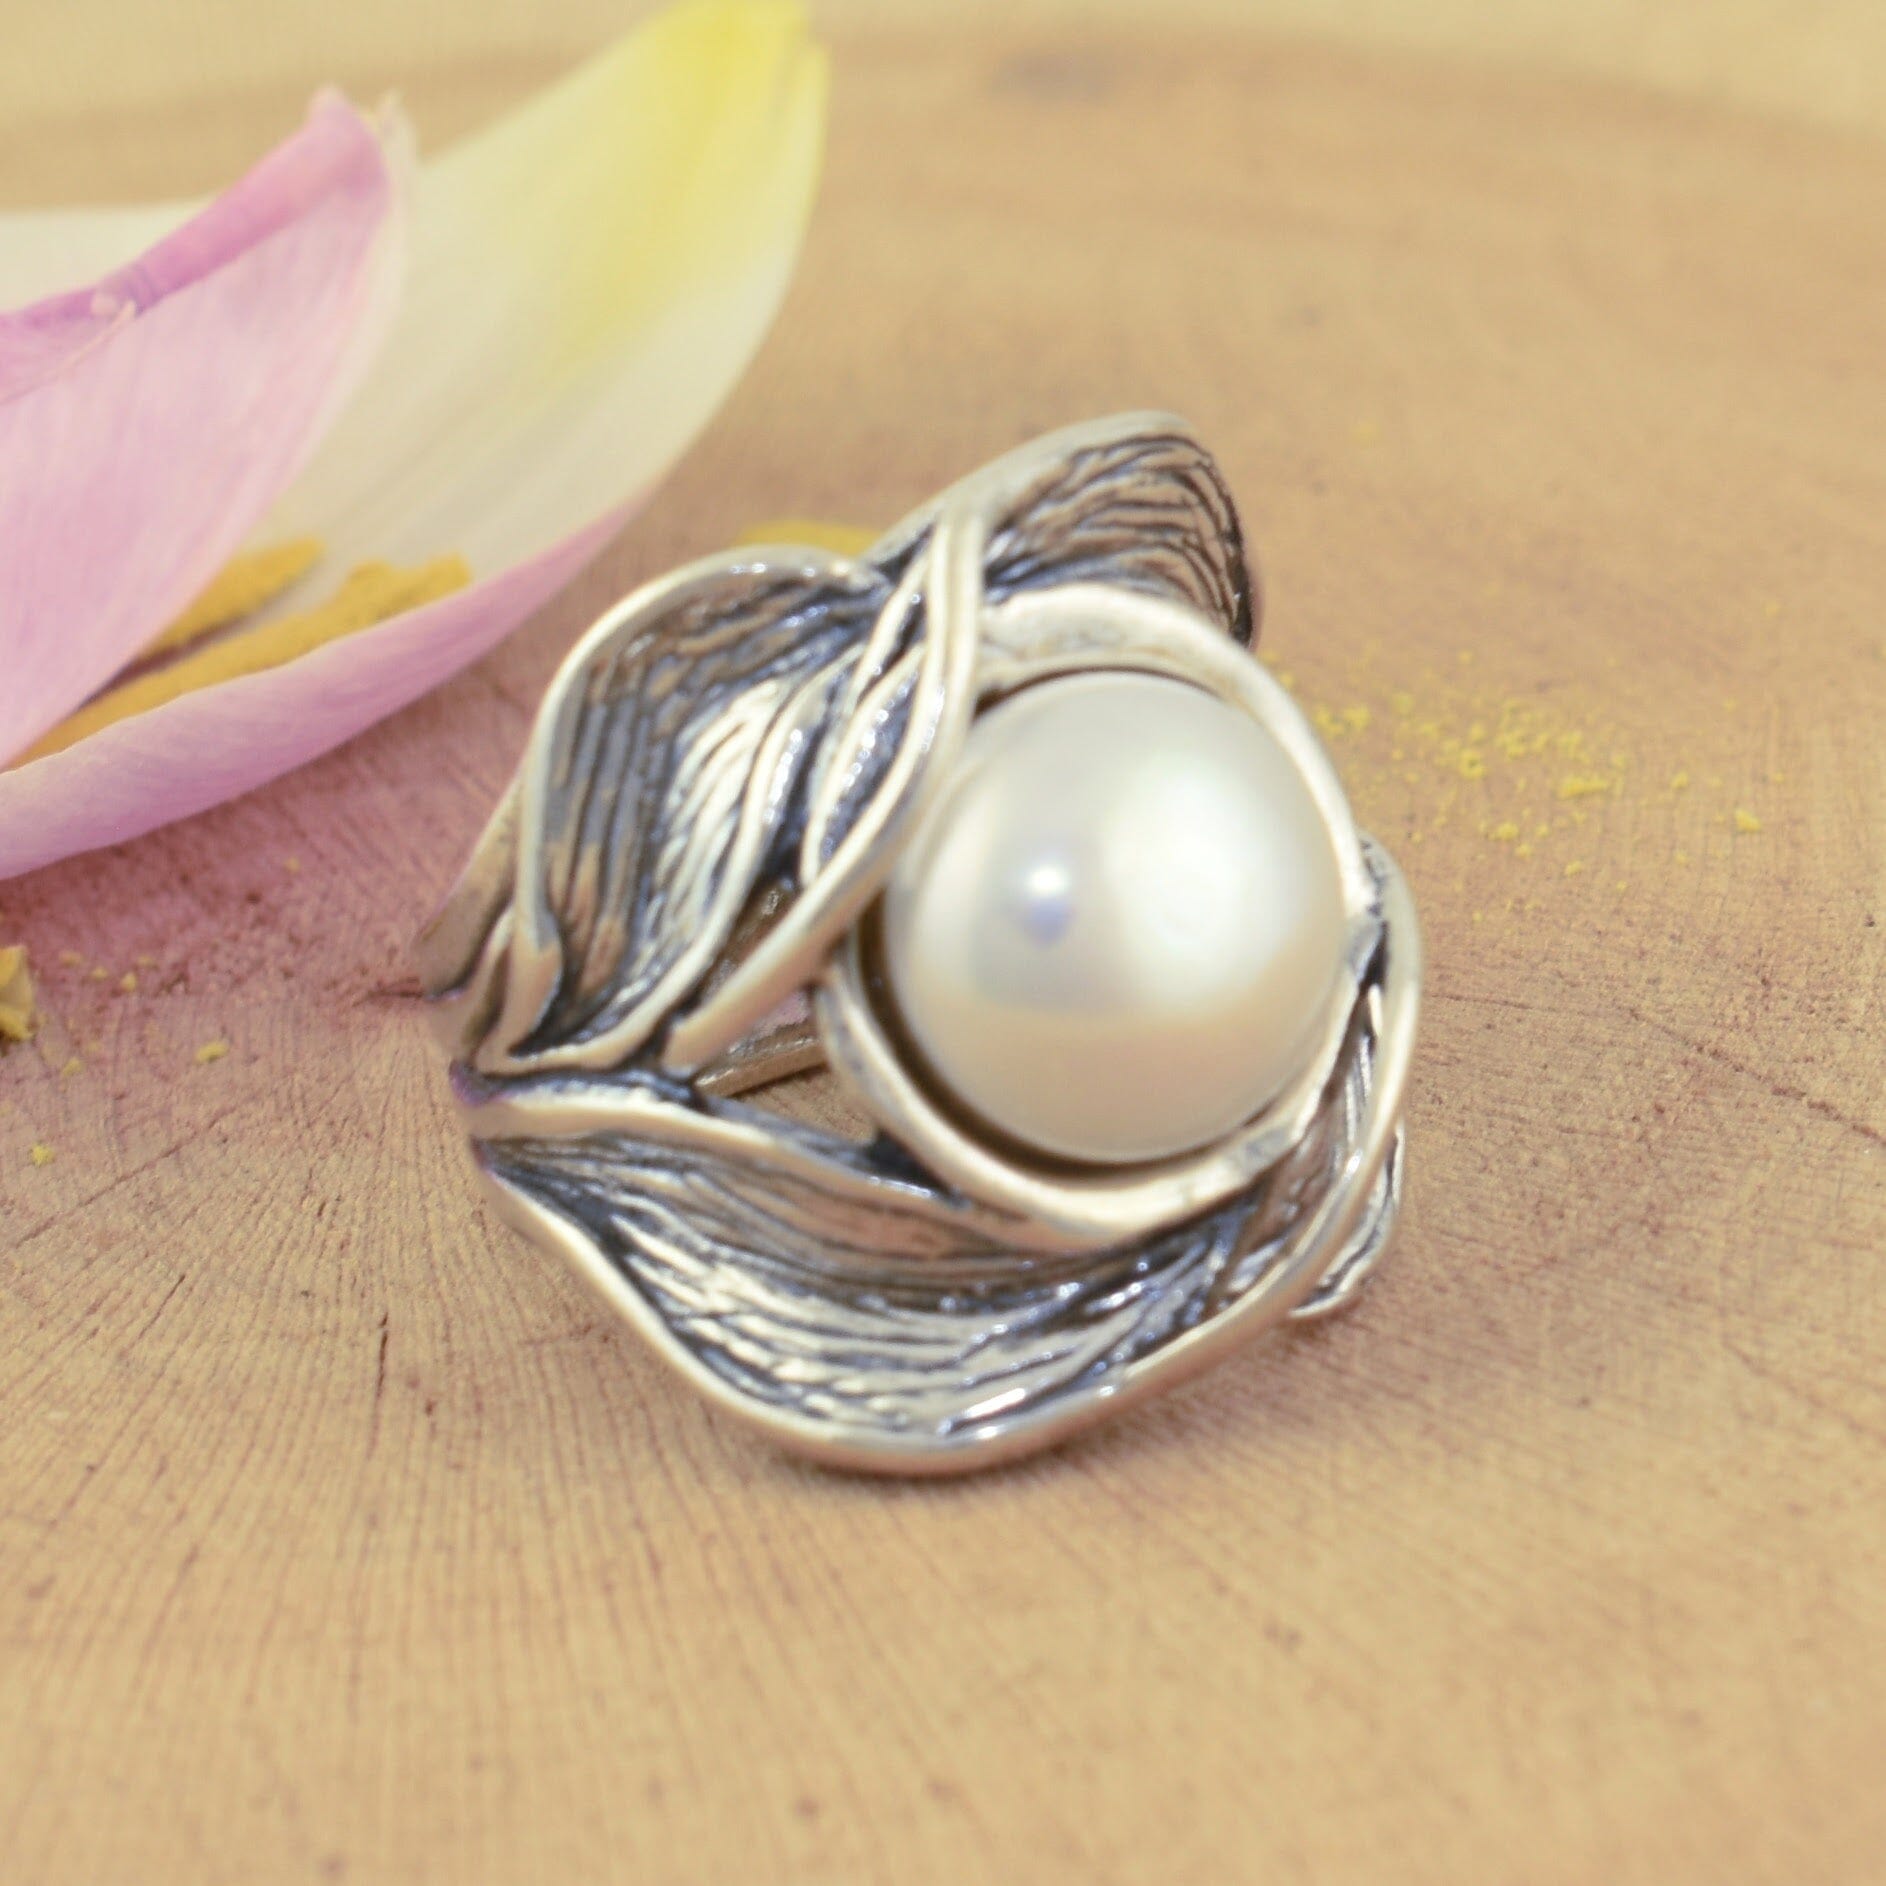 Wide band sterling silver ring with fabulous freshwater pearl